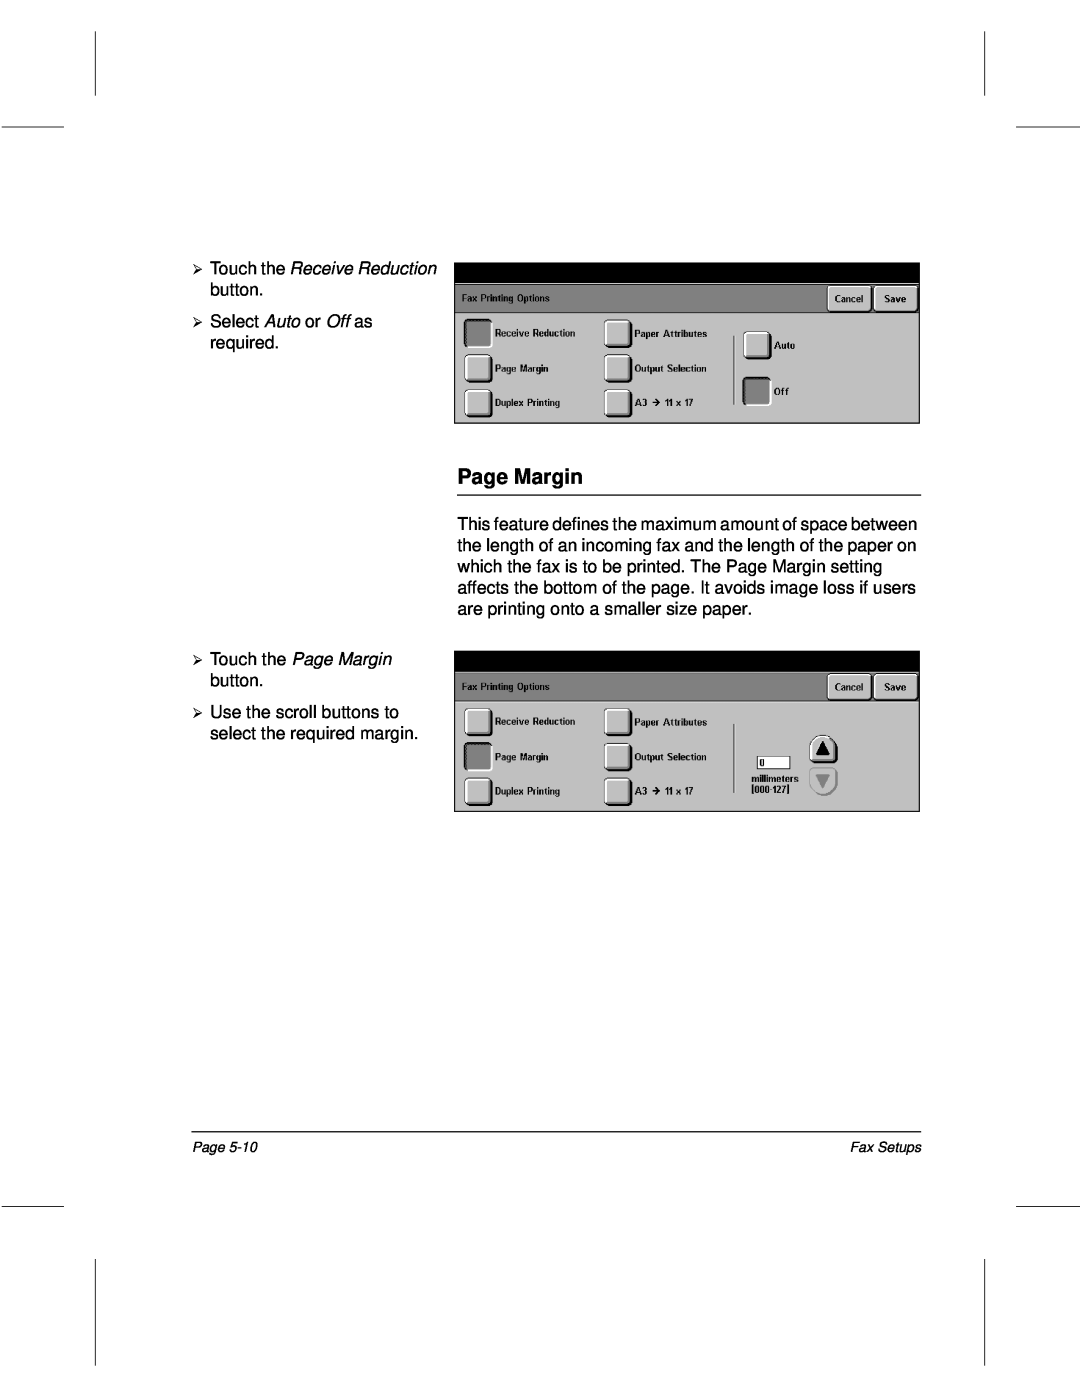 Xerox 340, 332, 220, 230 setup guide Touch the Receive Reduction, Touch the Page Margin 